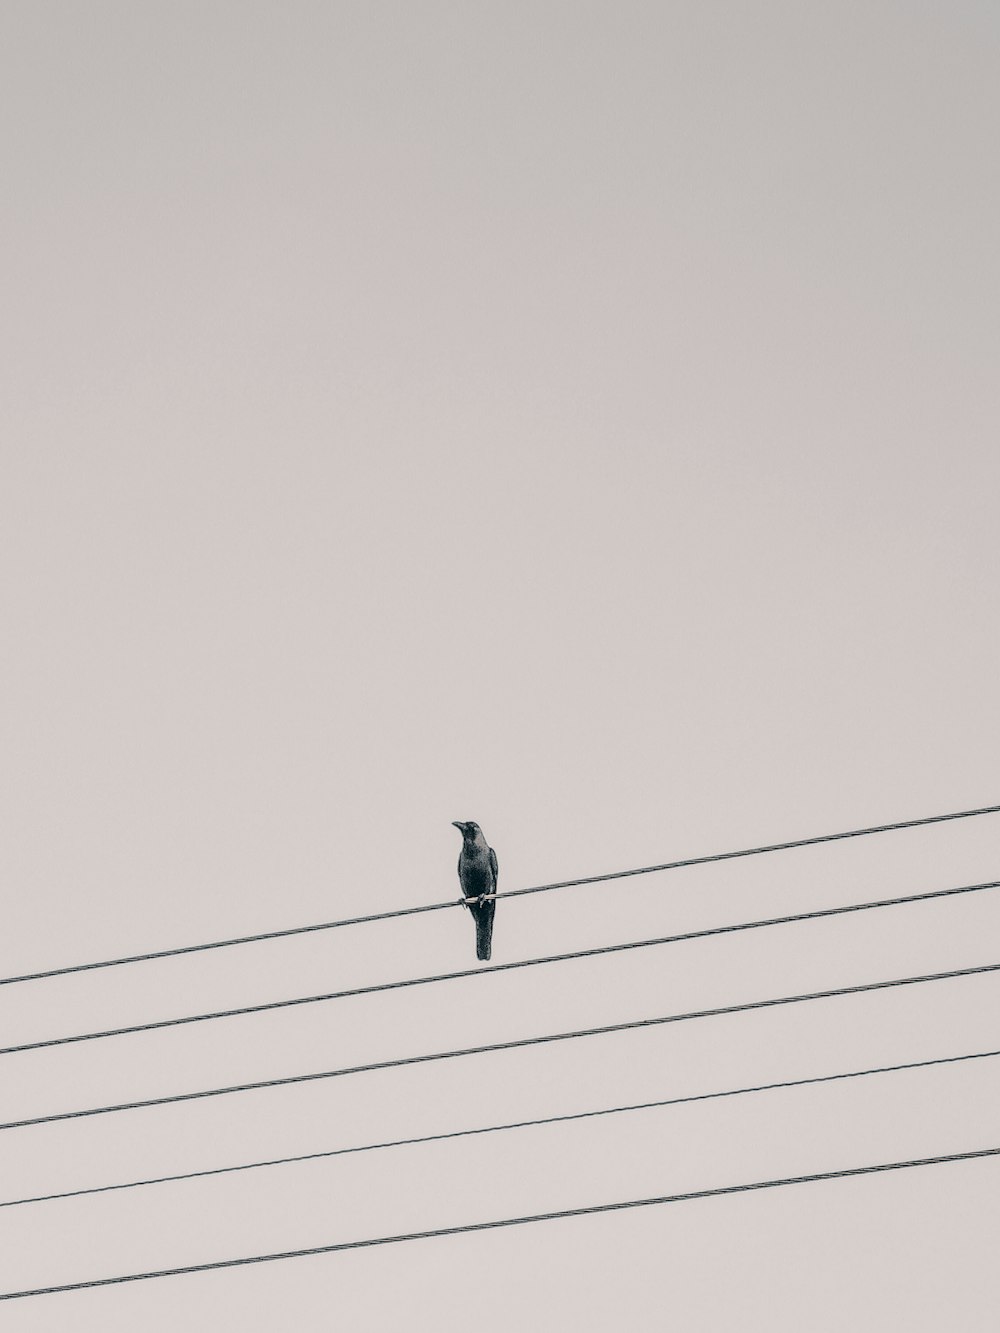 a bird sitting on top of a power line